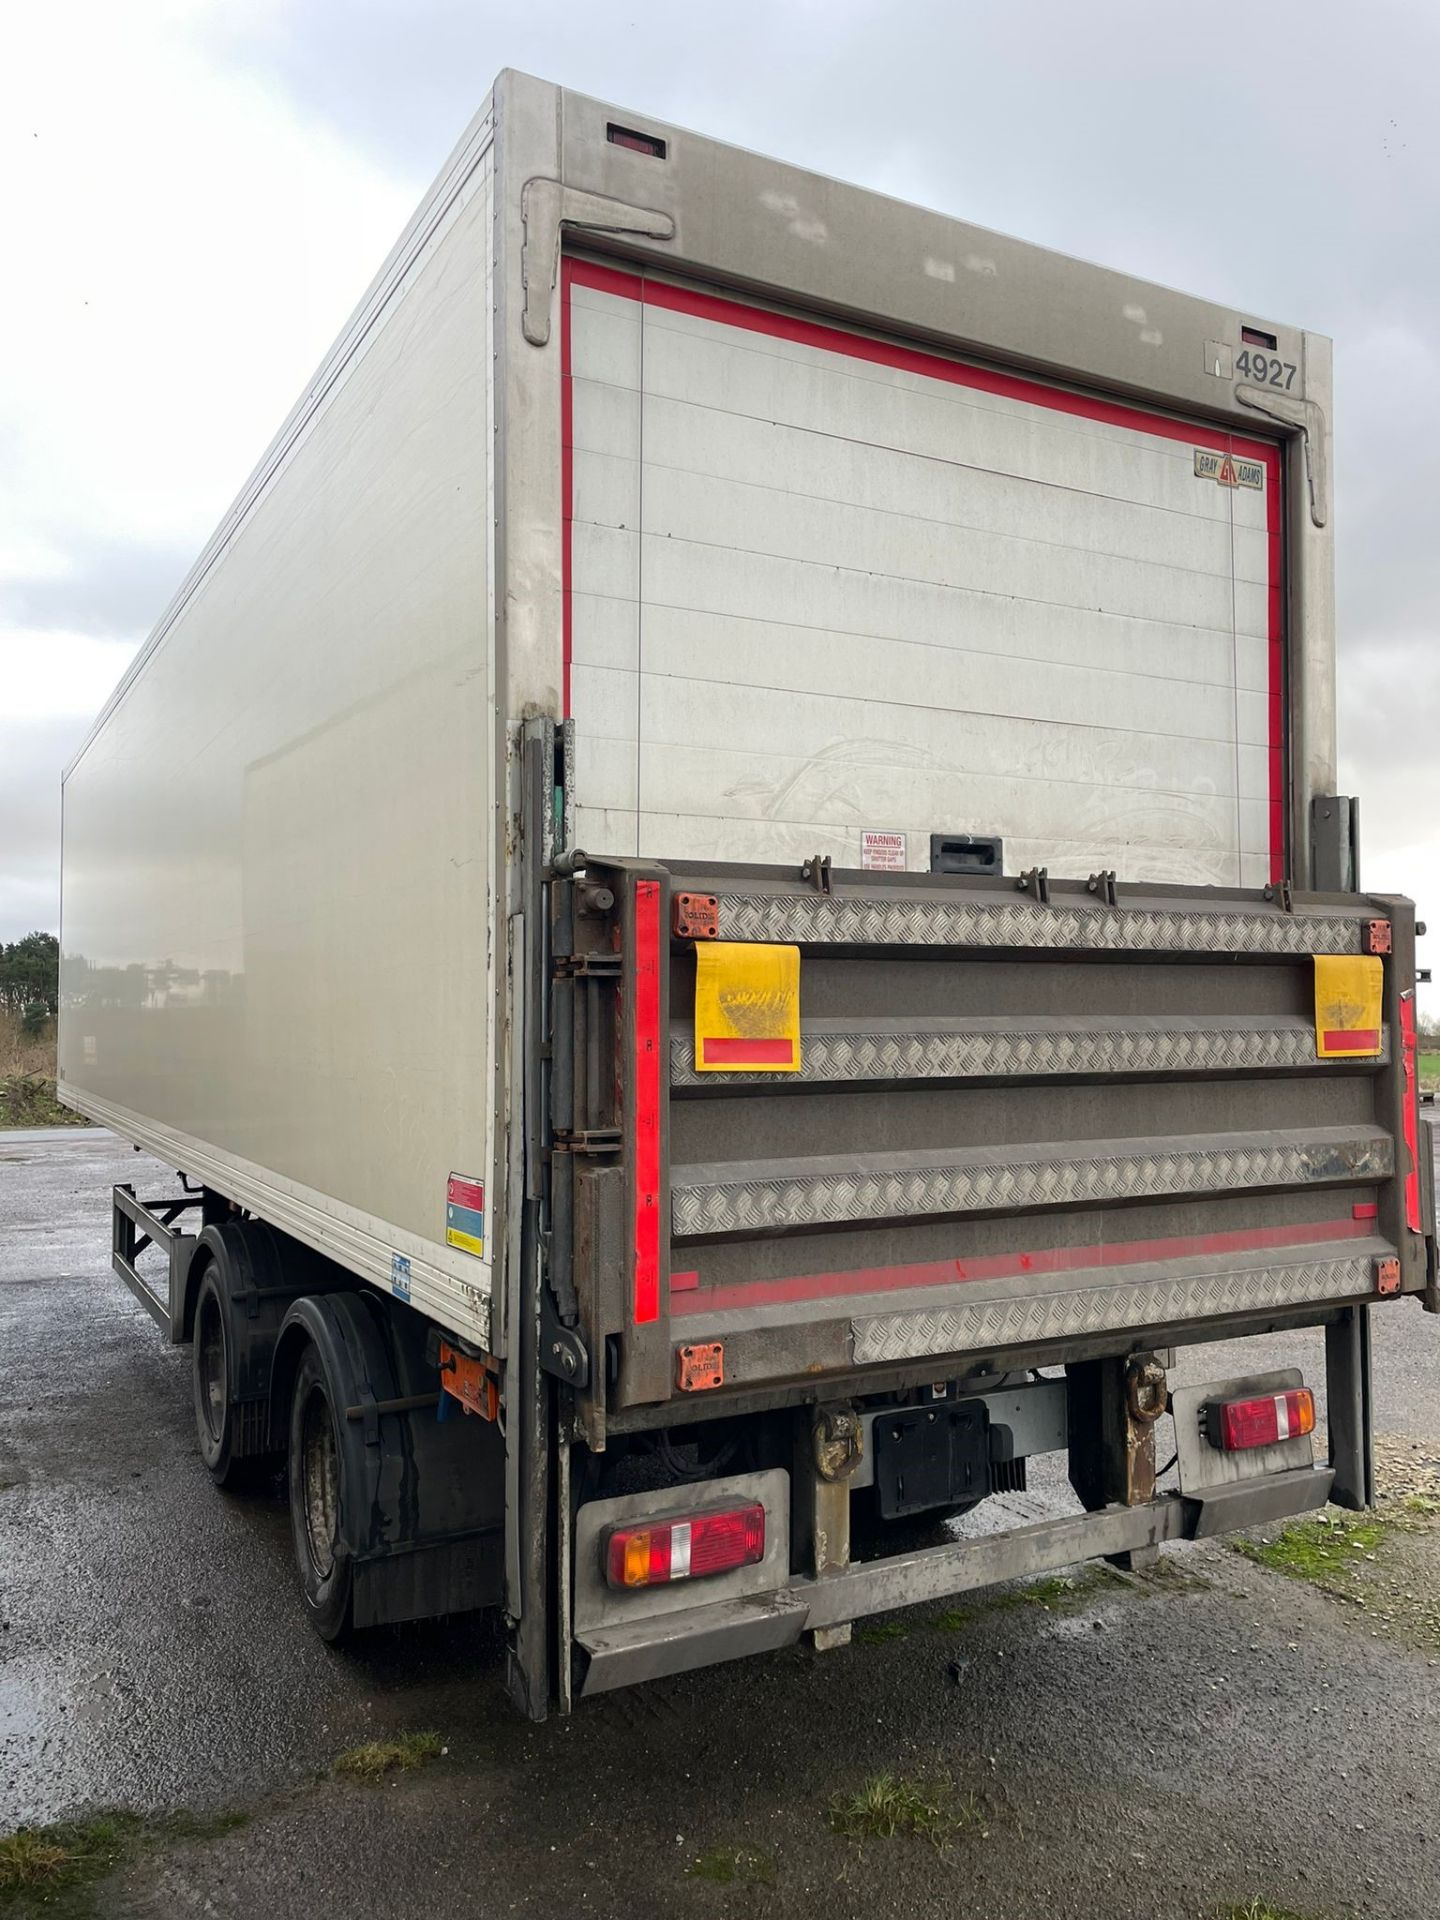 2013 G&A 10.4m Tandem Refrigerated Multi-Temp Trailer - Image 9 of 14